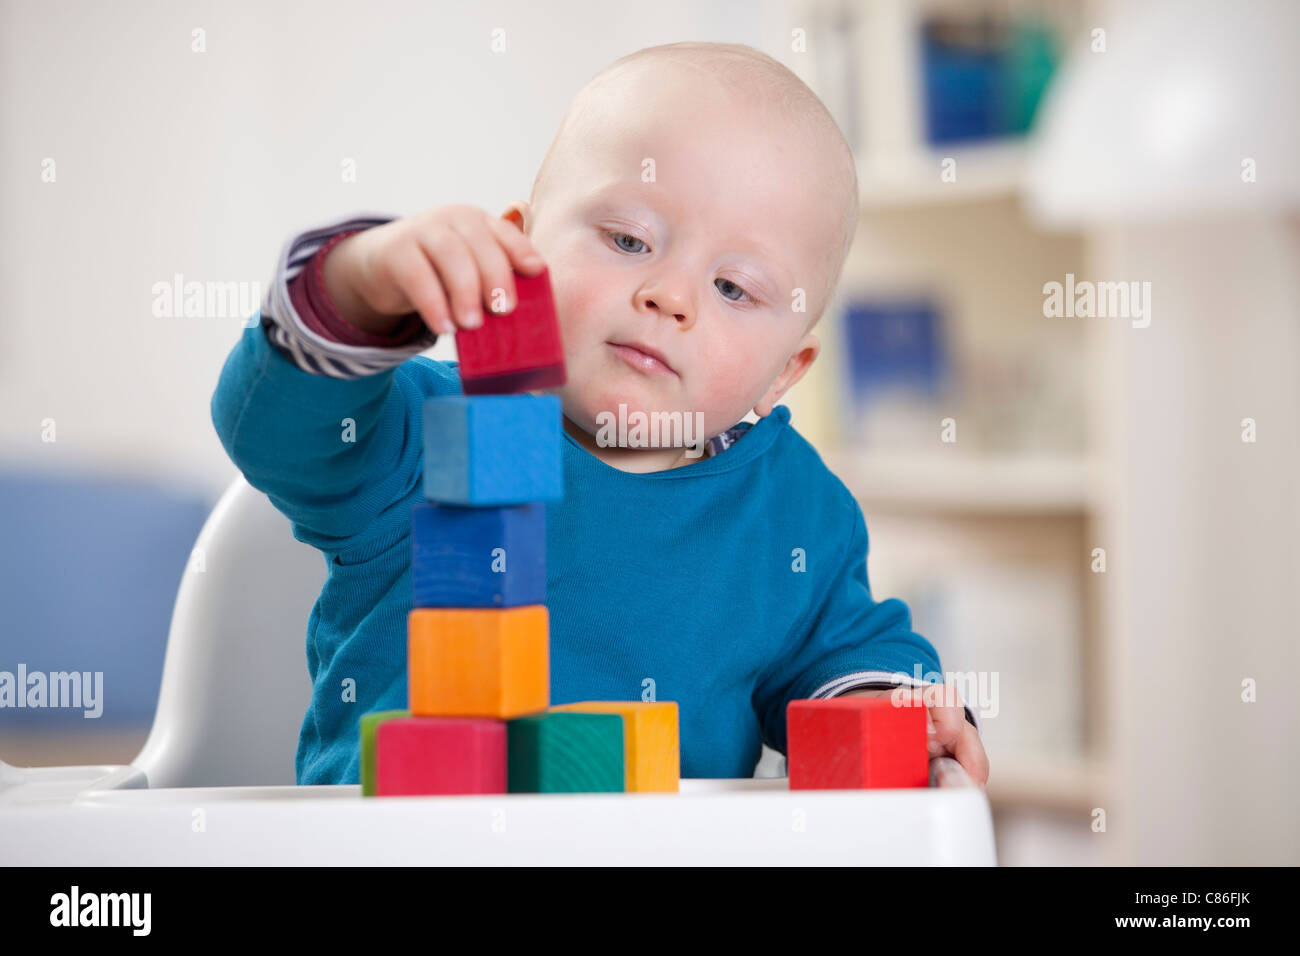 Baby boy playing with toy blocks Banque D'Images